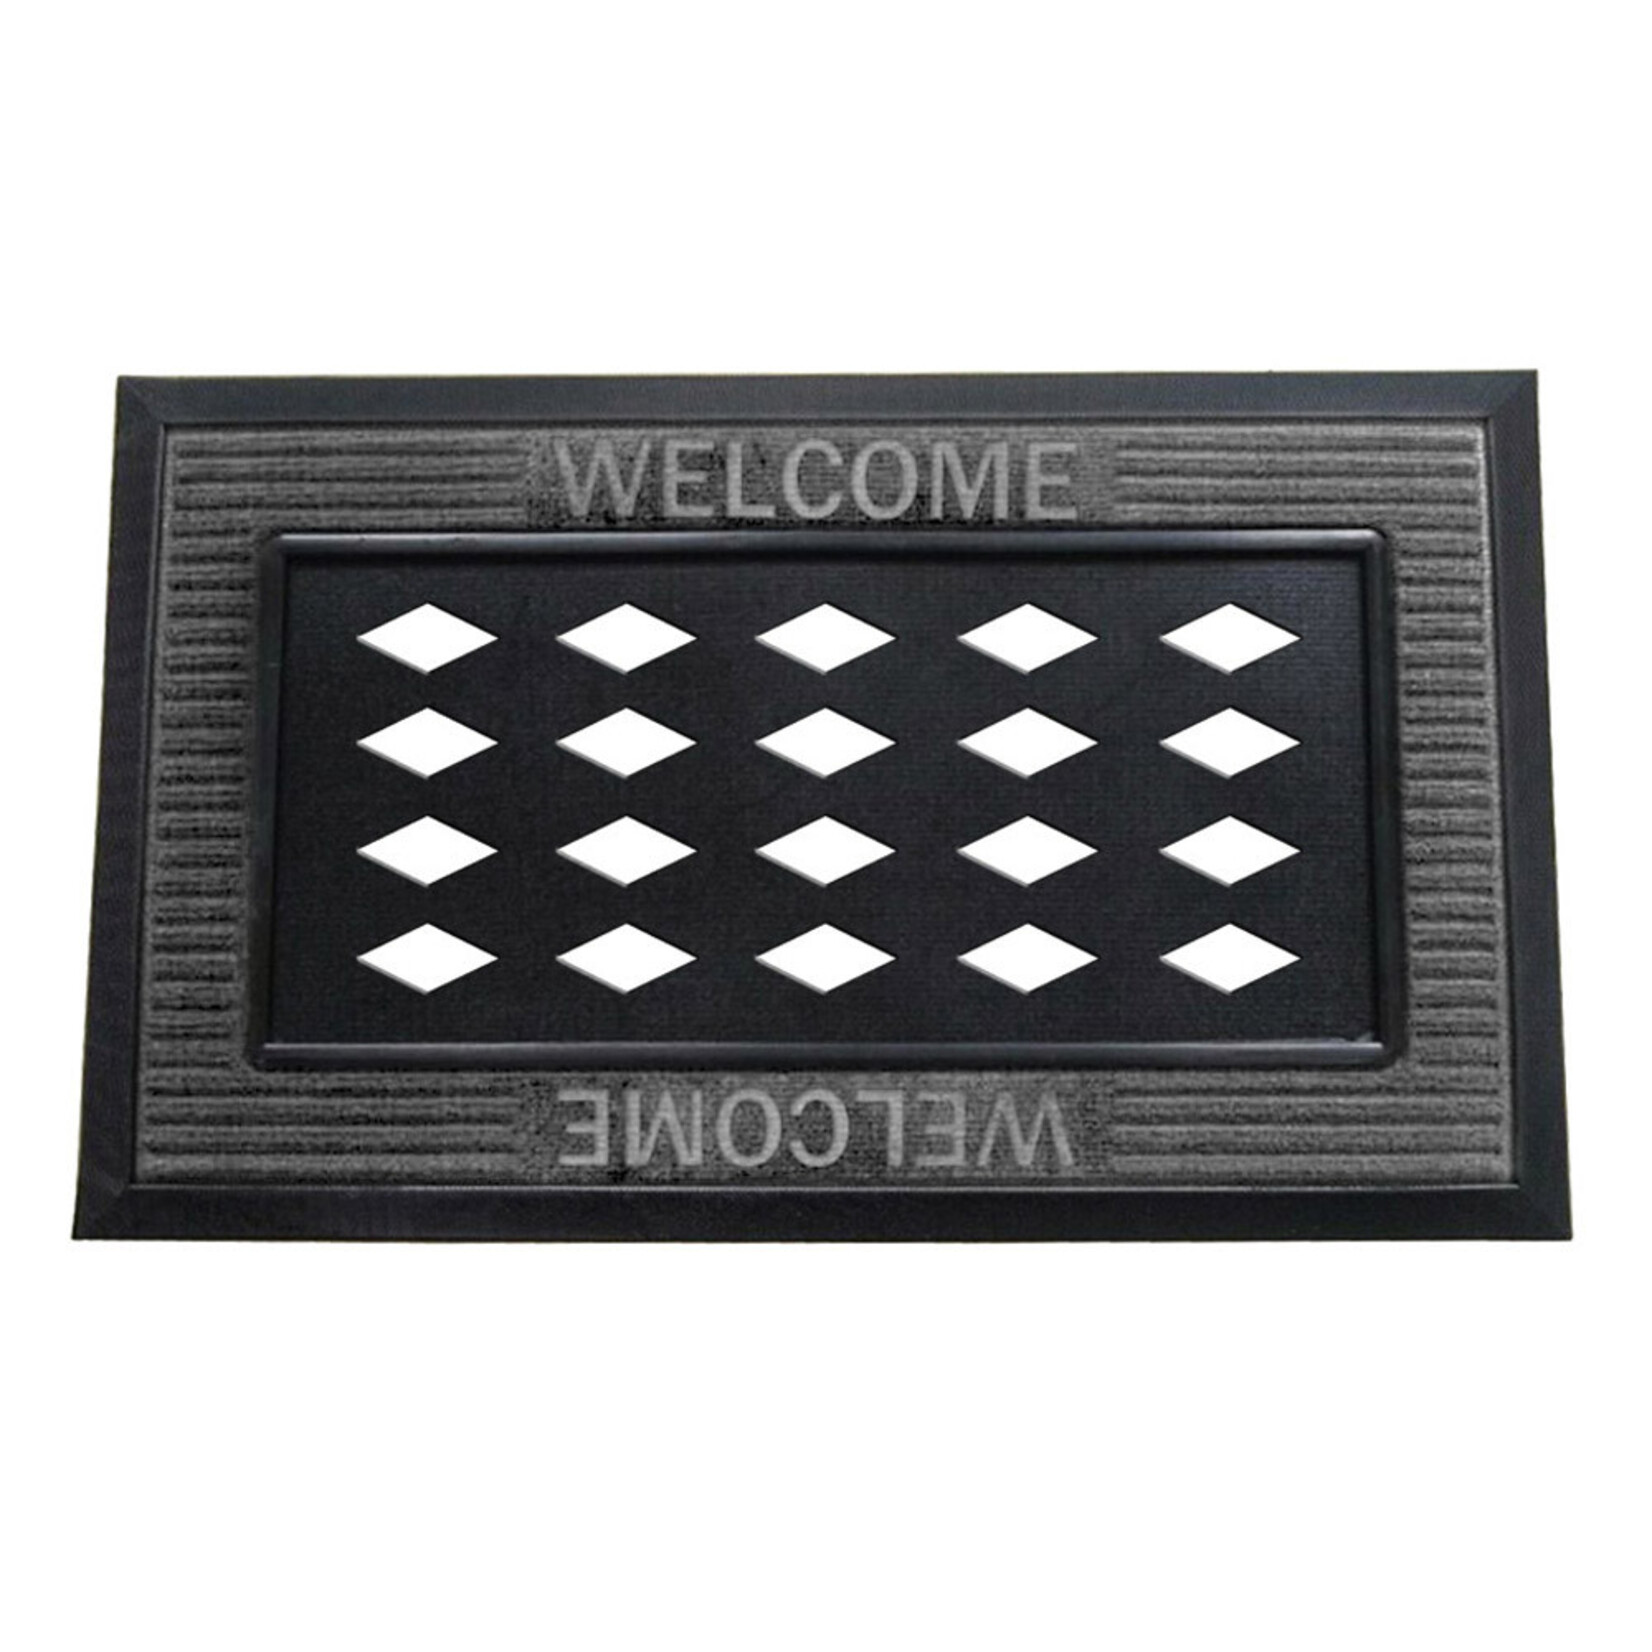 Switch Mat Tray Black Welcome